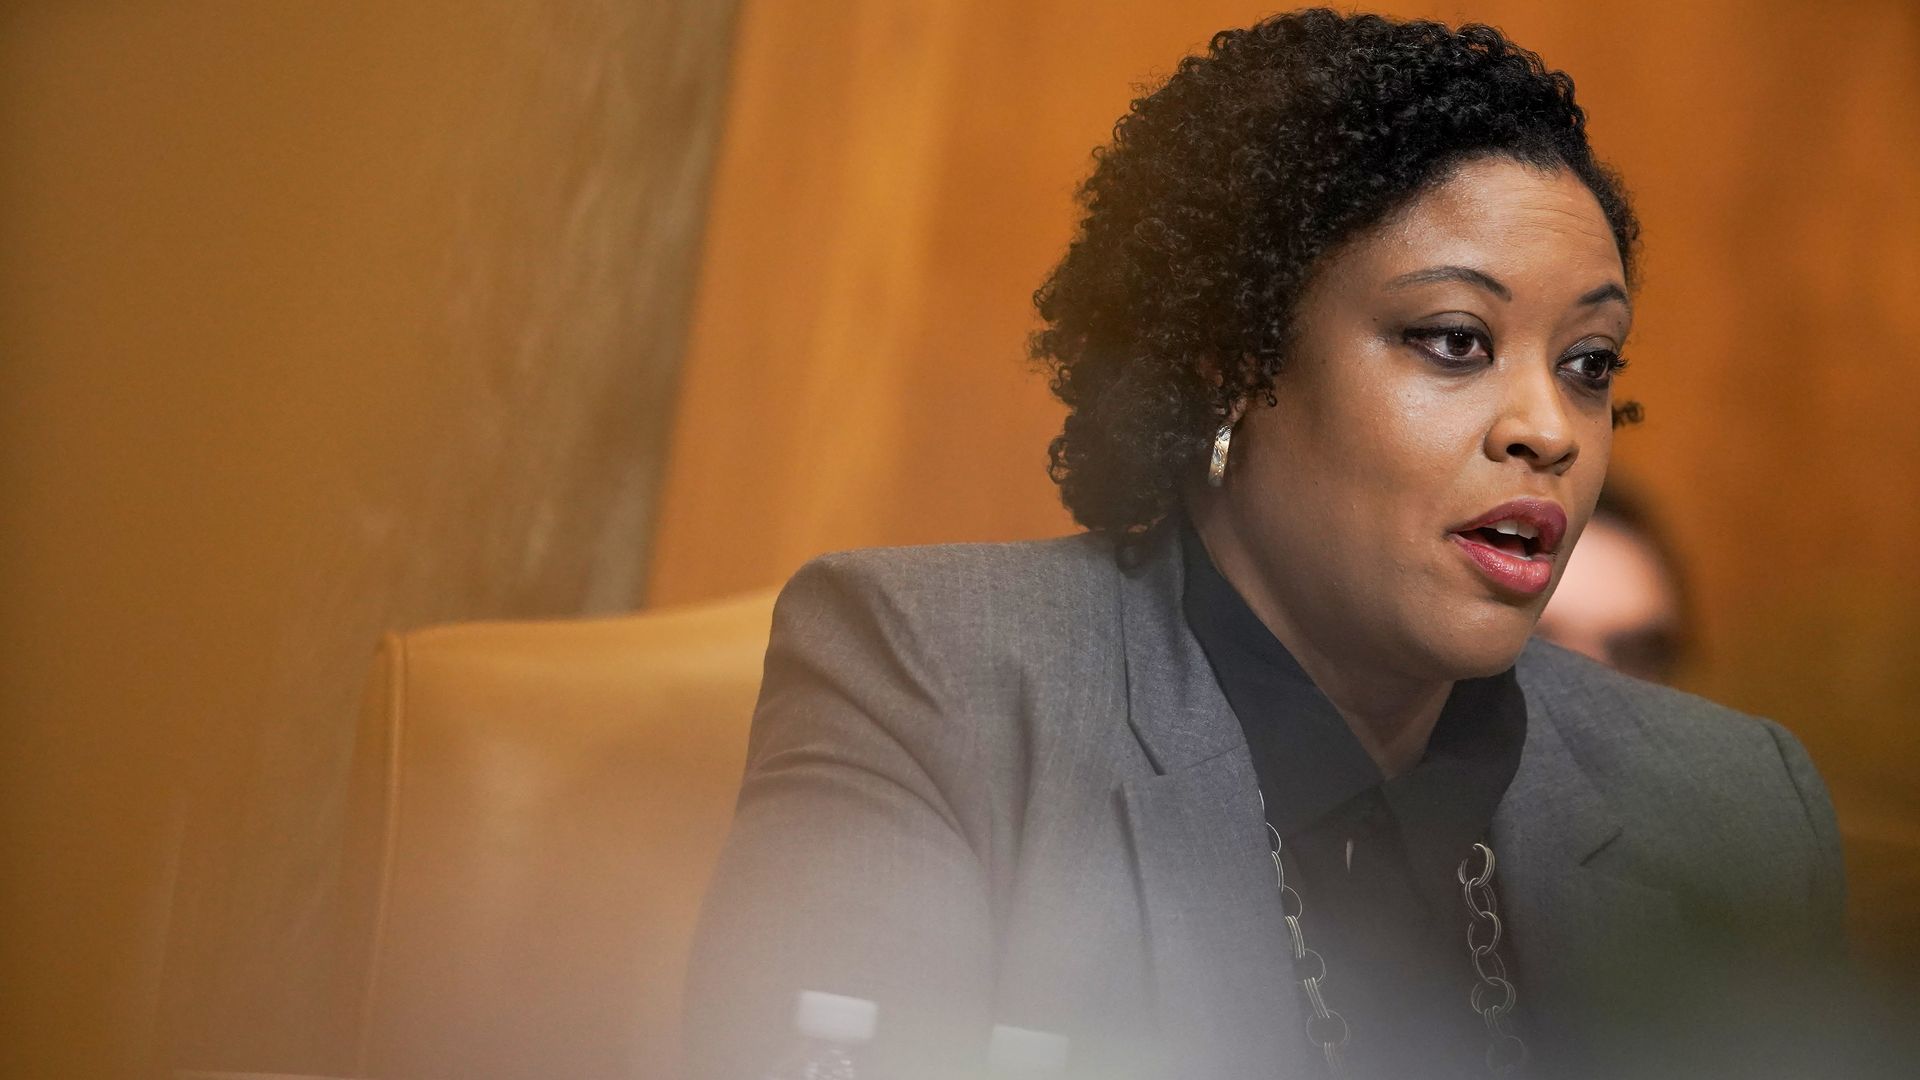 Office of Management and Budget acting director Shalanda Young during a Senate hearing in June 2021.